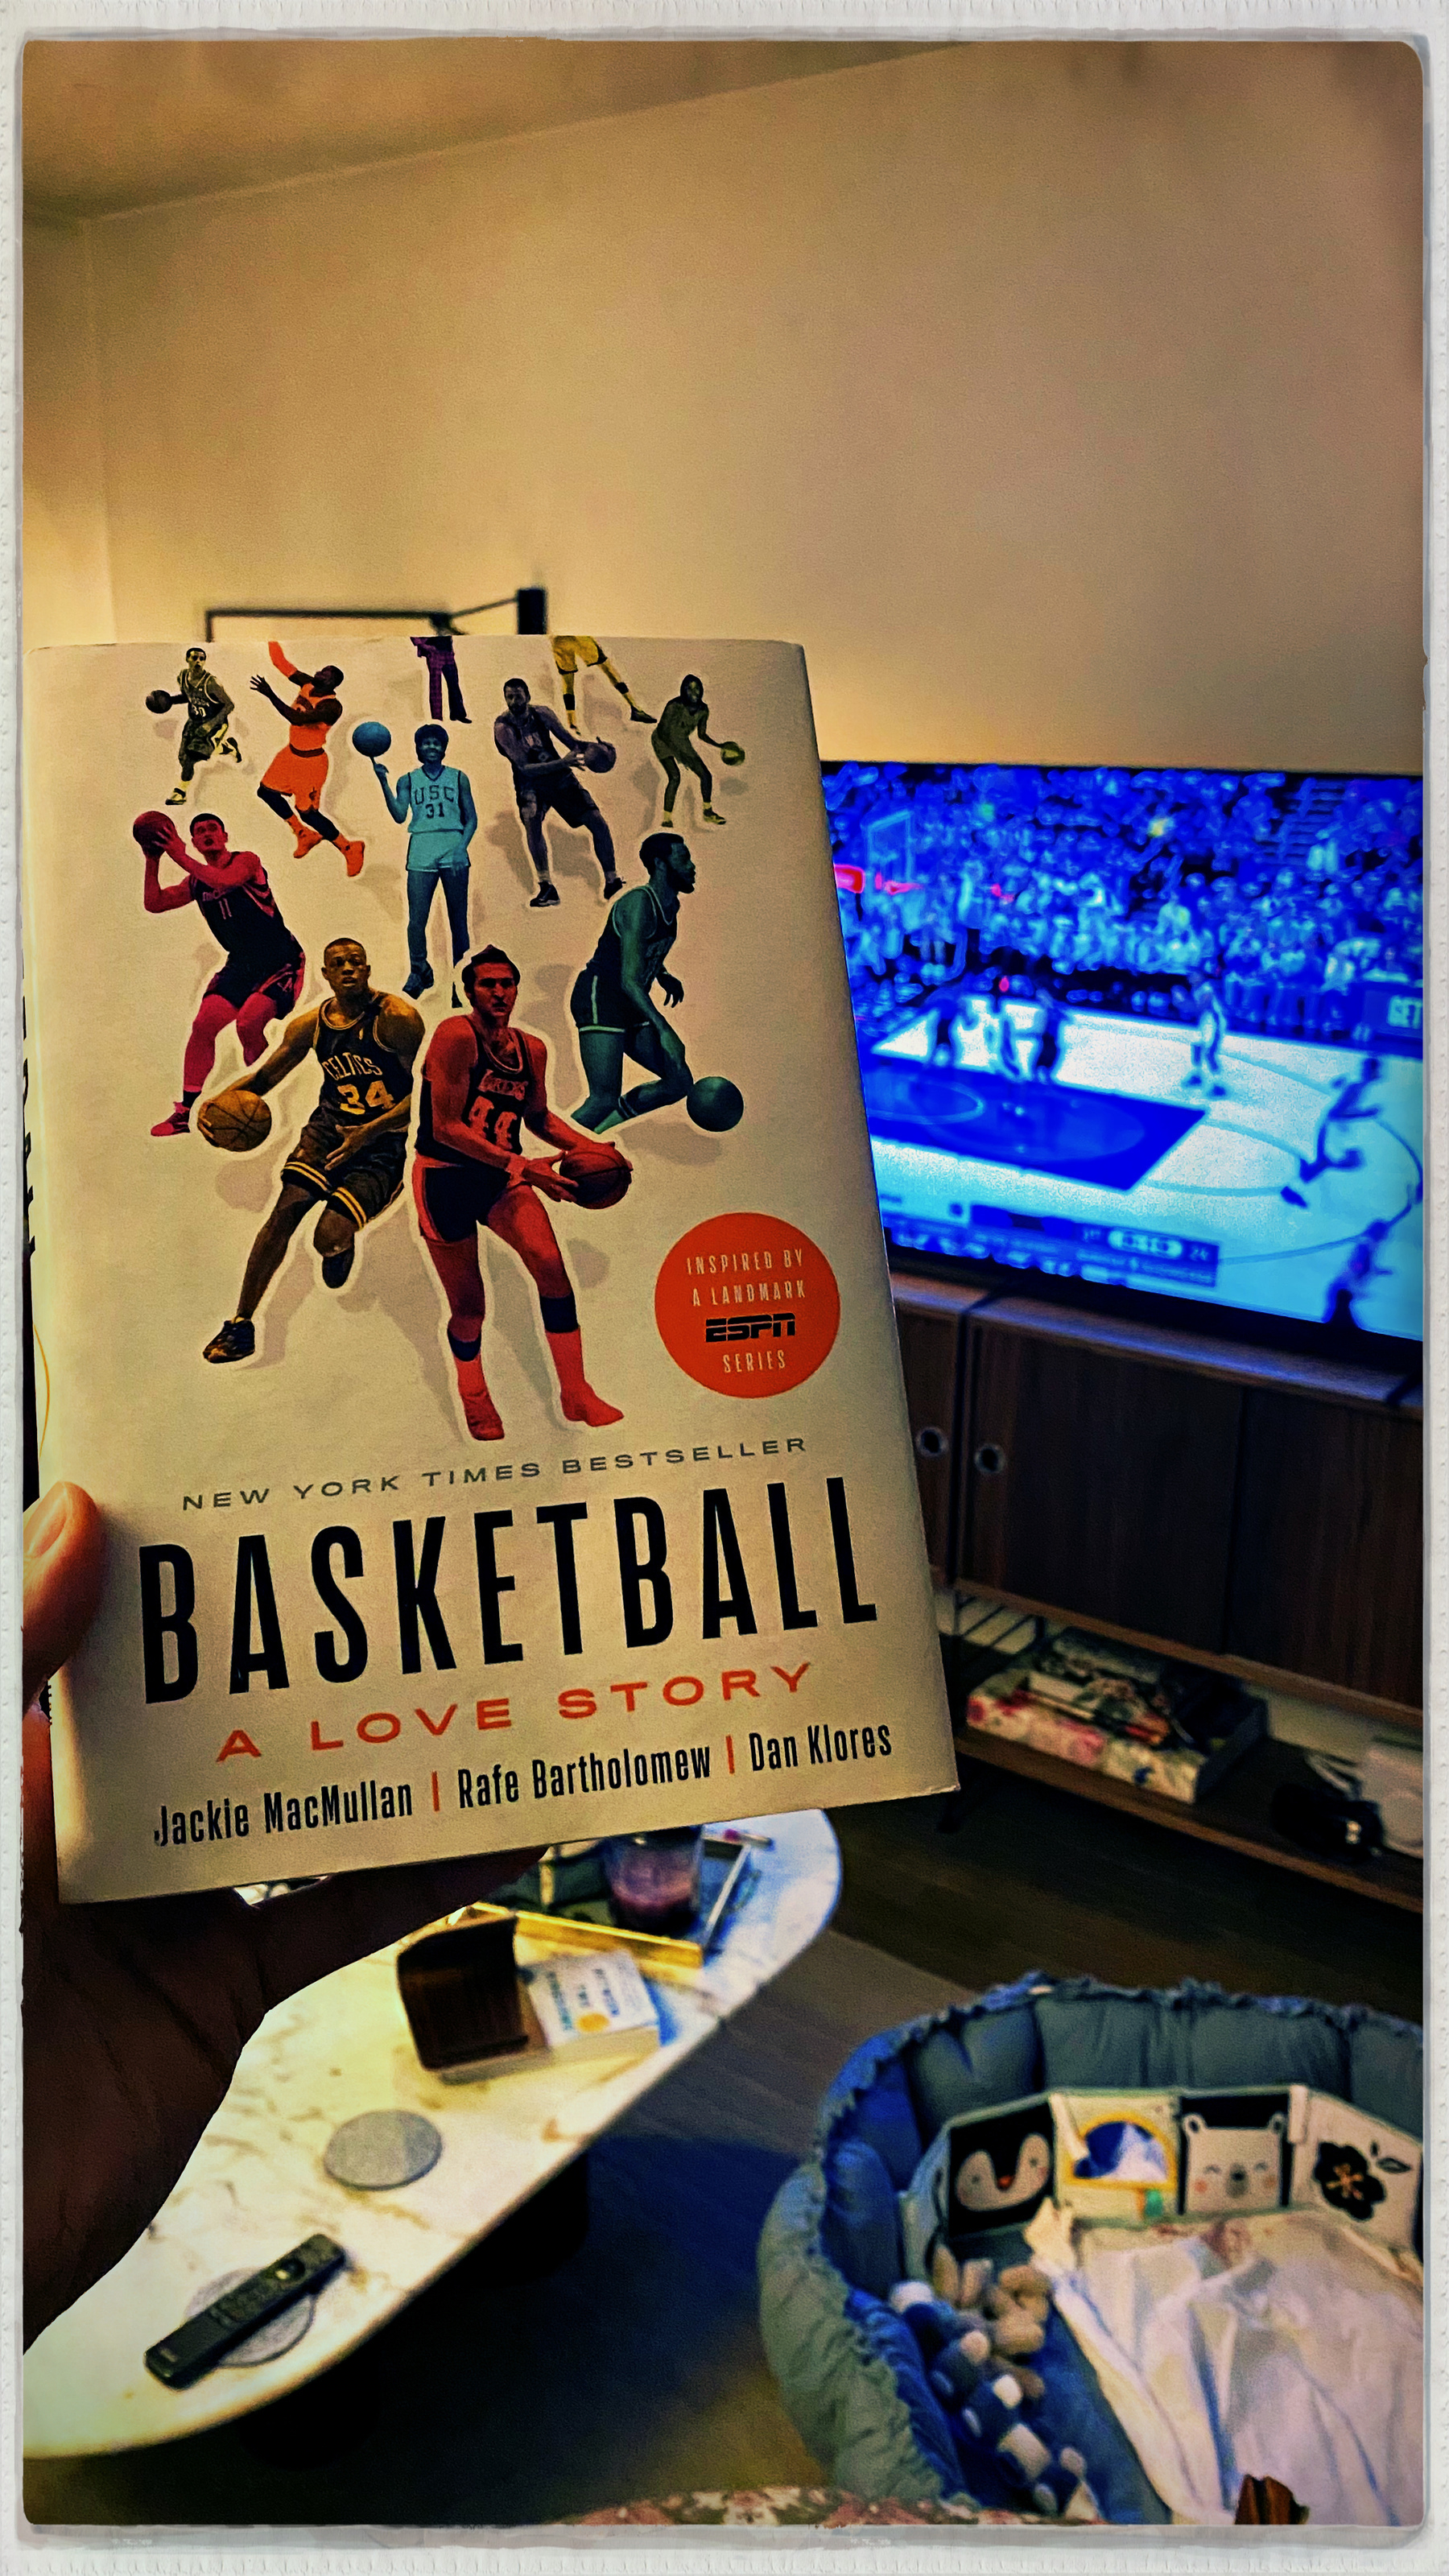 Basketball: a love story, a book by Jackie McMullan, Rafe Bartholomew, and Dan Klores 